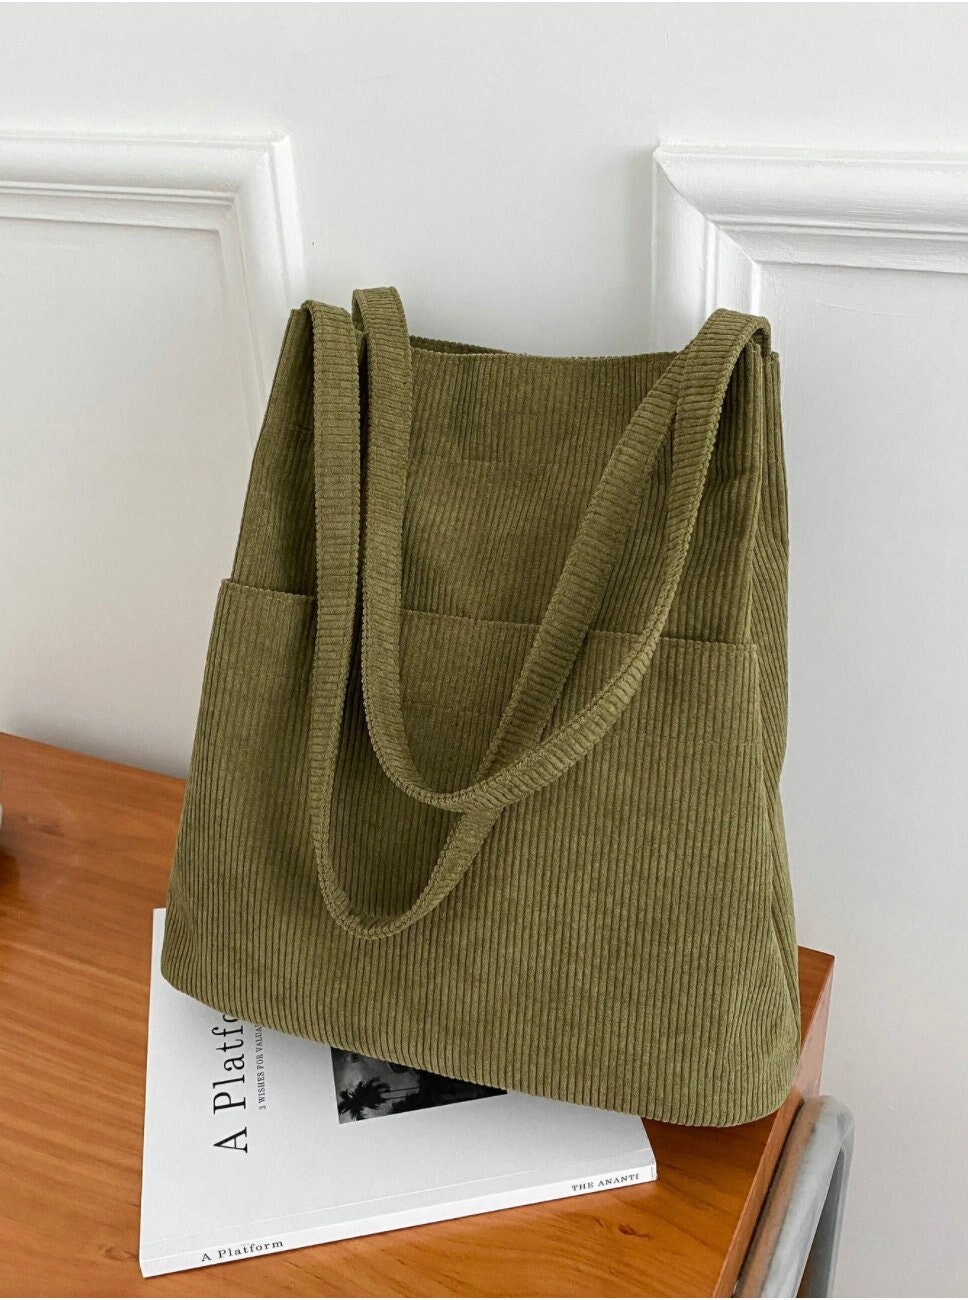 Ecla Studio Green/olive Corduroy Medium Tote Bag With Two Side - Etsy